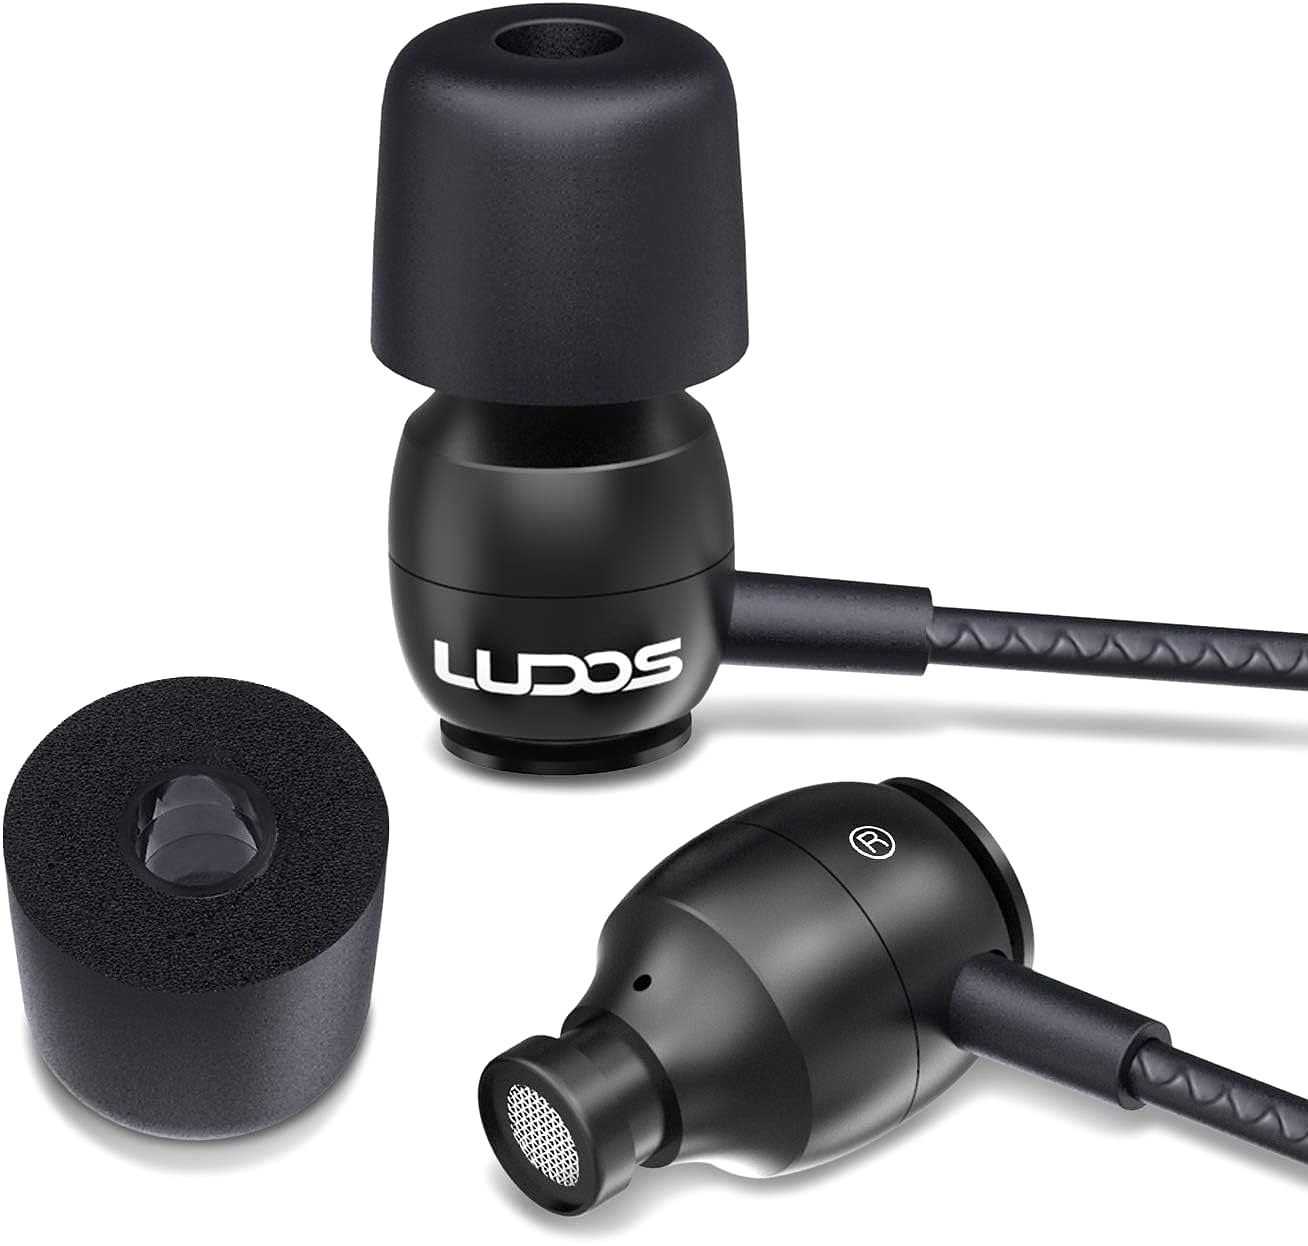  Ludos Clamor 3.5mm Wired Earbuds       